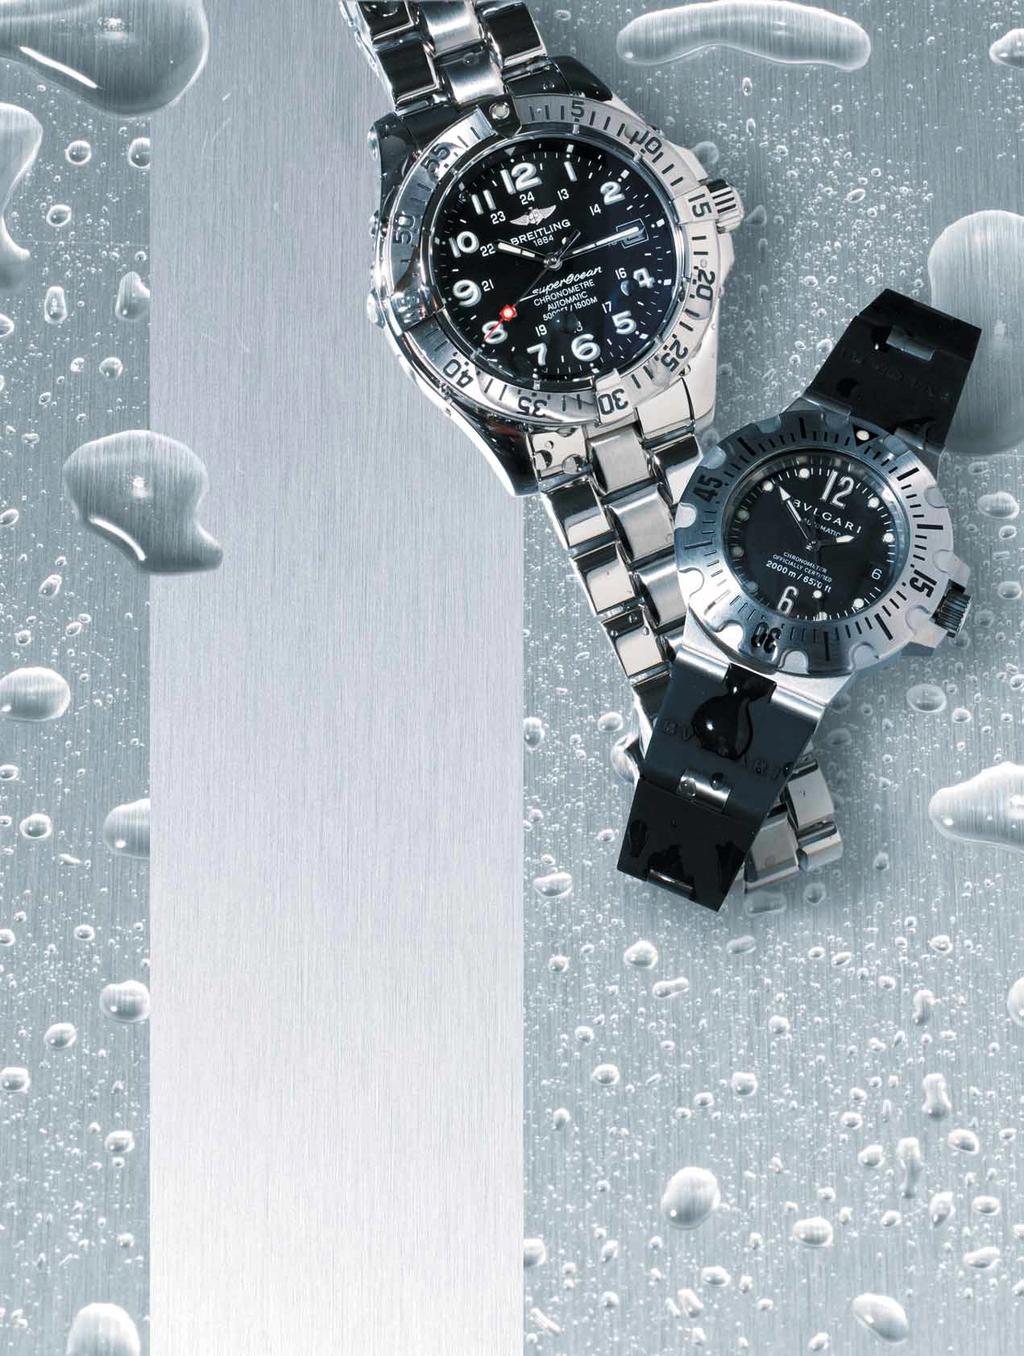 Breitling Super Ocean Developed in the 1950s, the Super Ocean features thick glare-proof glass. Waterresistant to 1500m. $3030 corrosion or condensation was revealed.